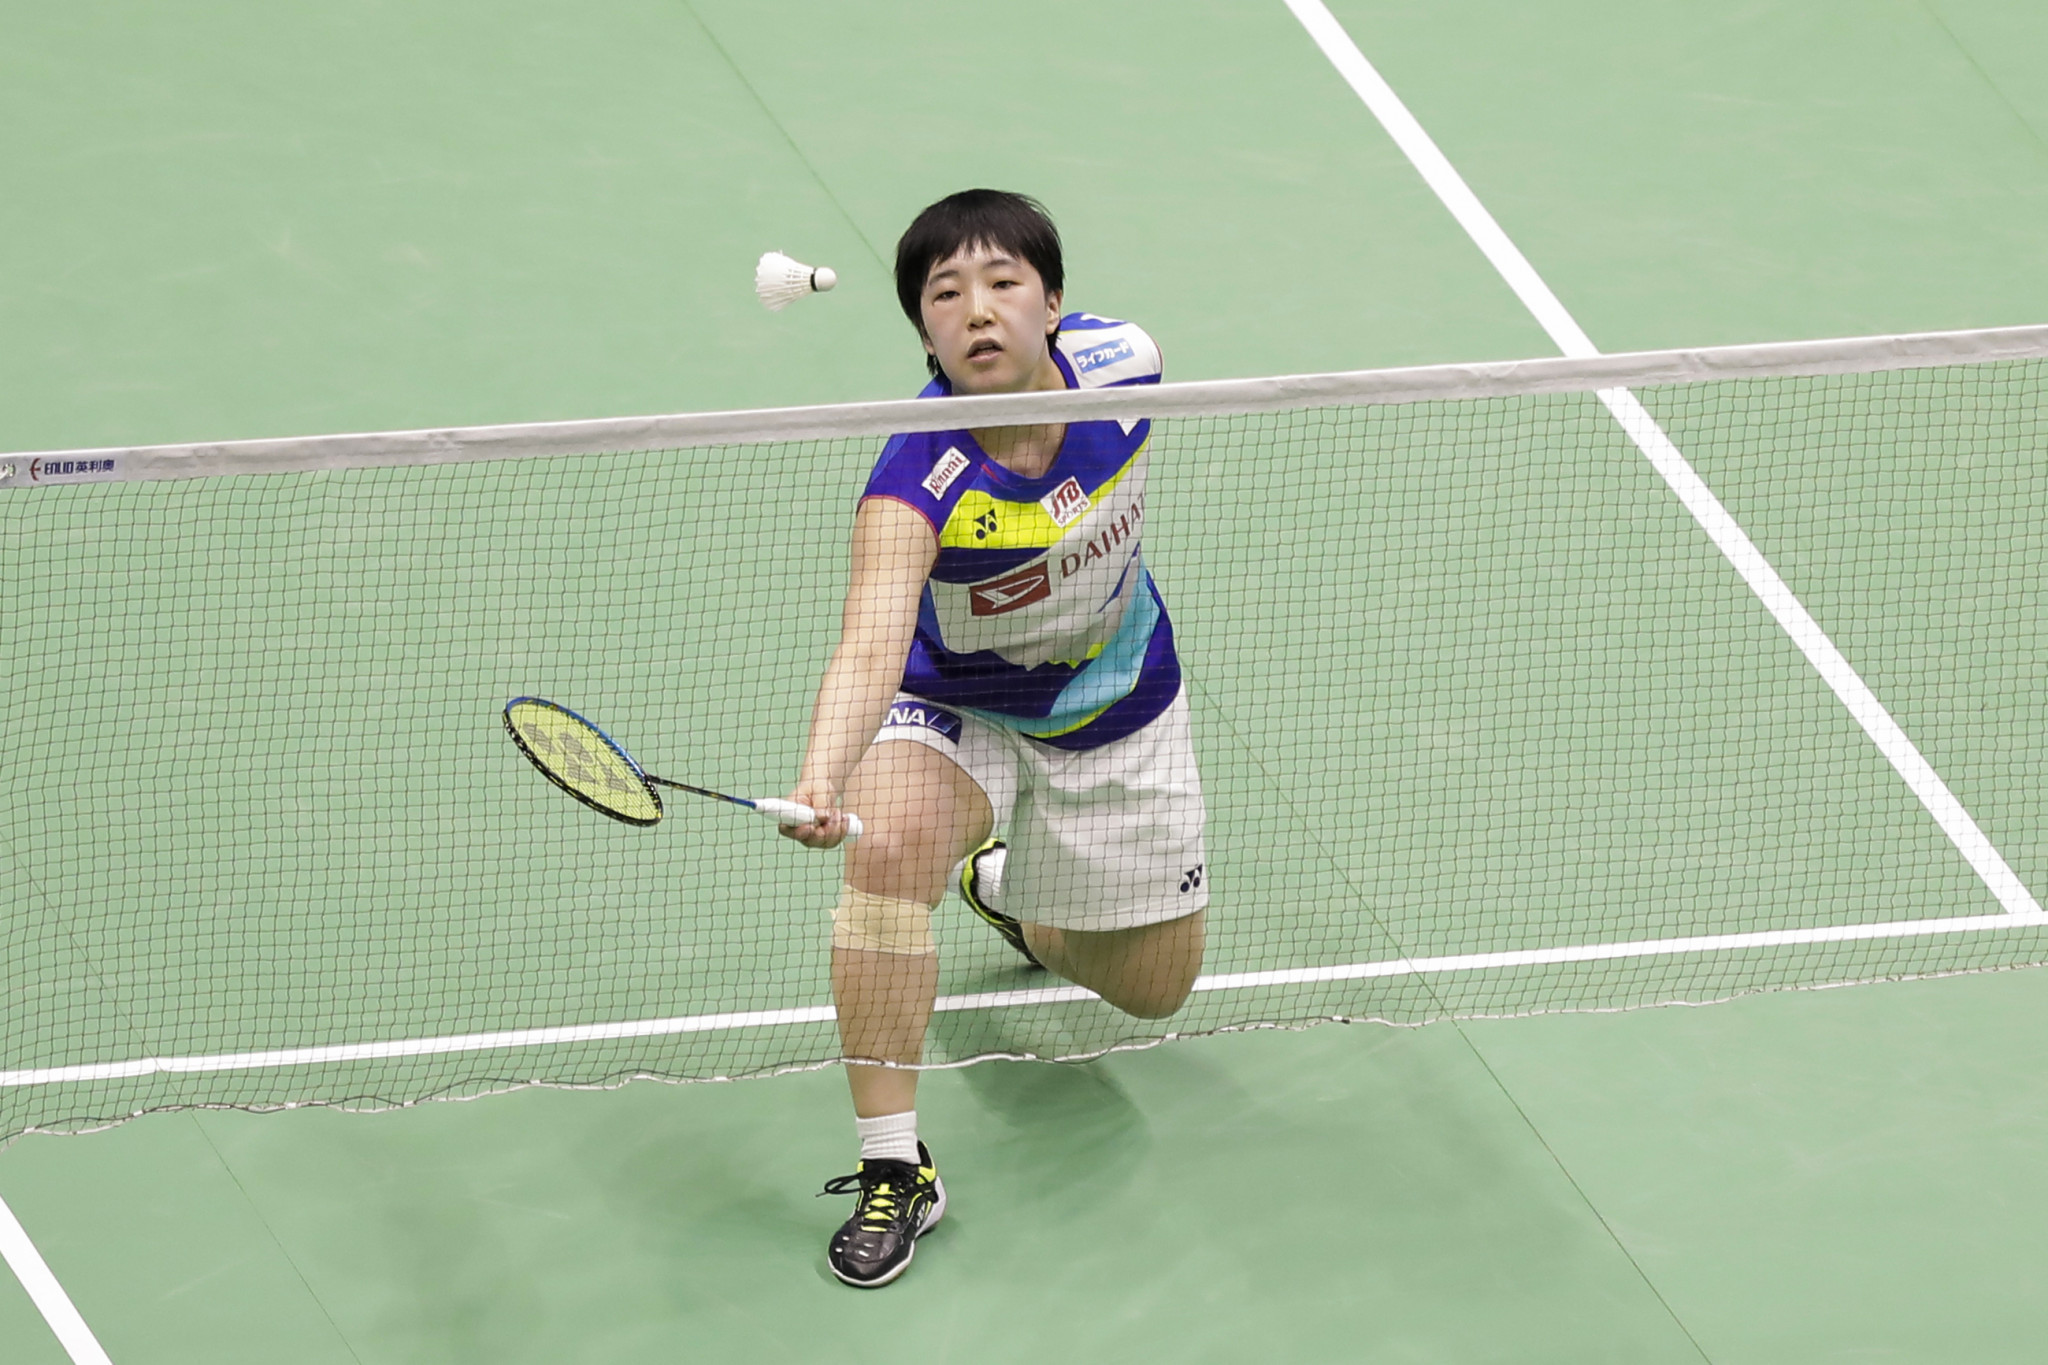 Akane Yamaguchi progressed to the quarter-final stage of the competition ©Getty Images